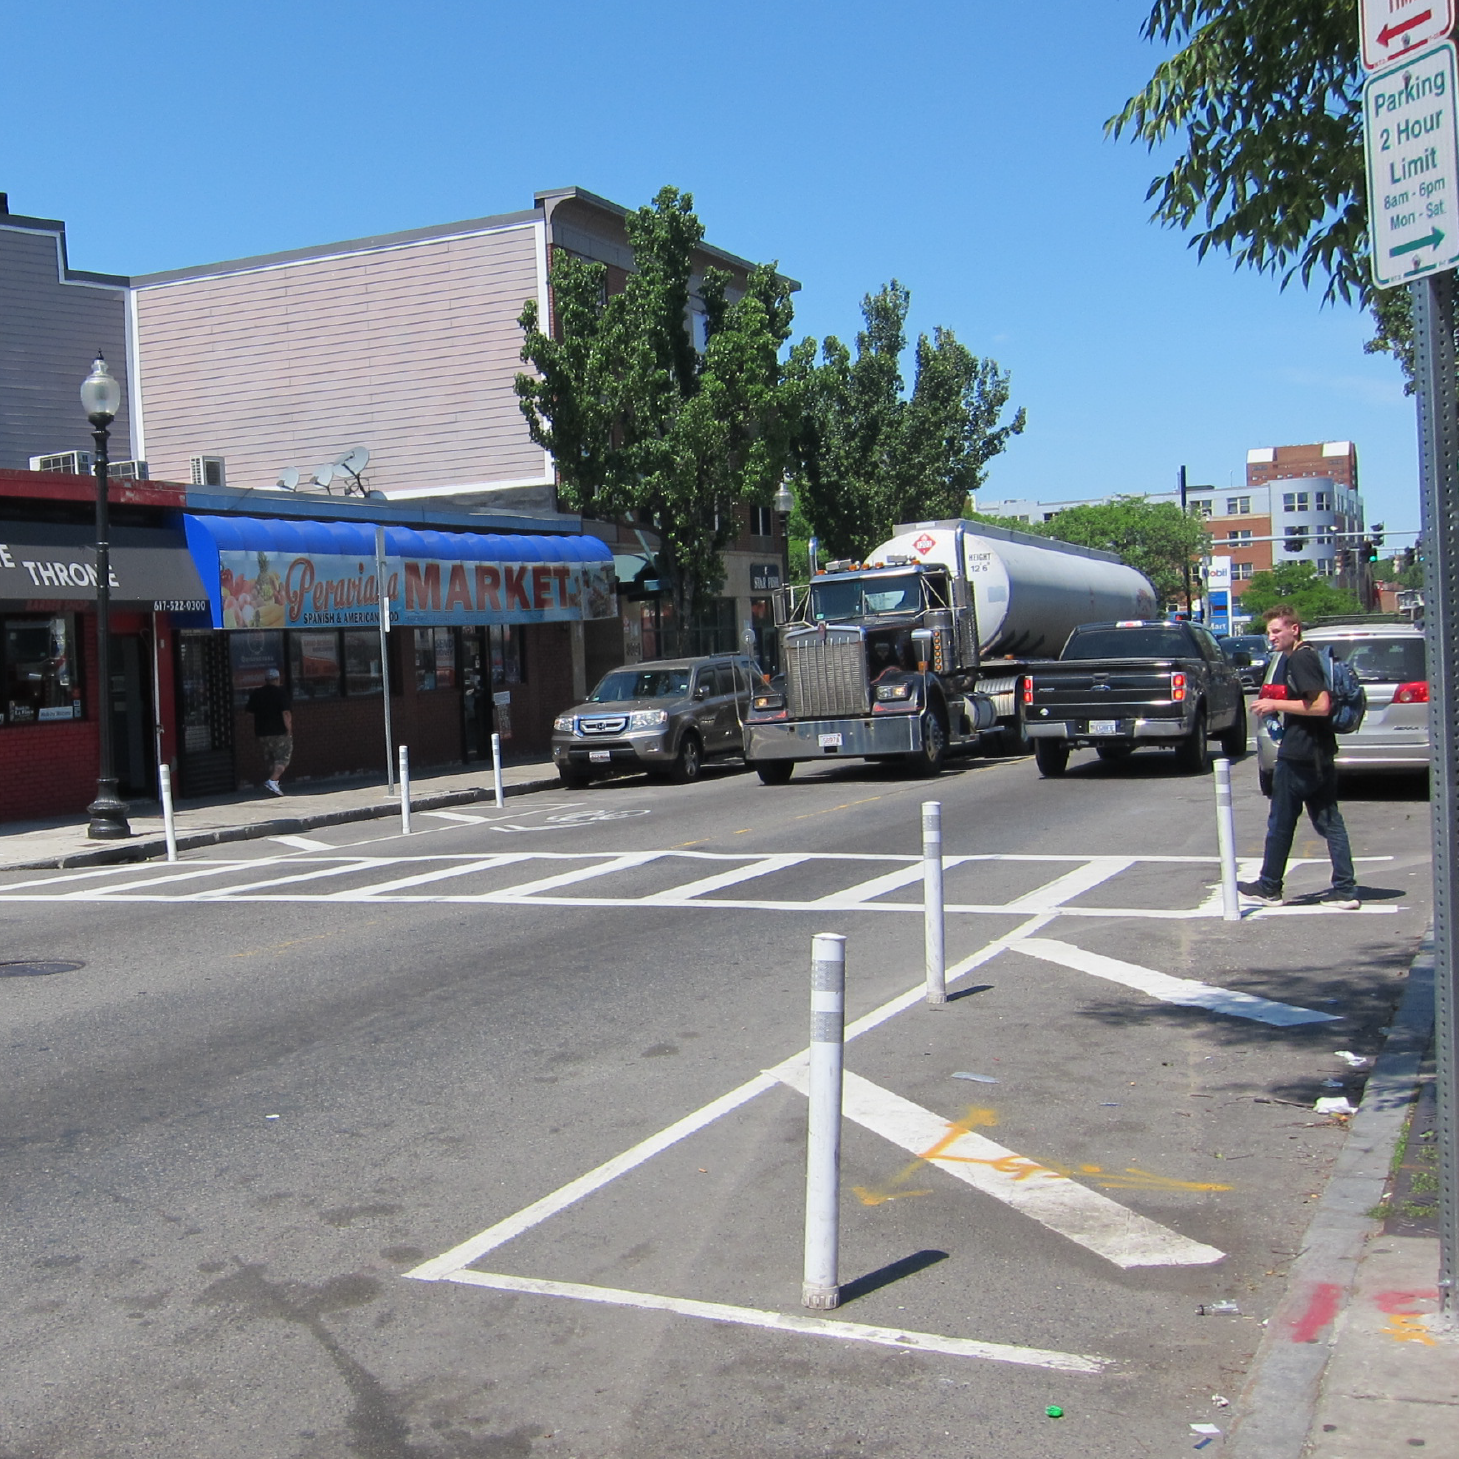 White pavement markings and plastic posts mark "no parking" areas on the approach to a crosswalk.